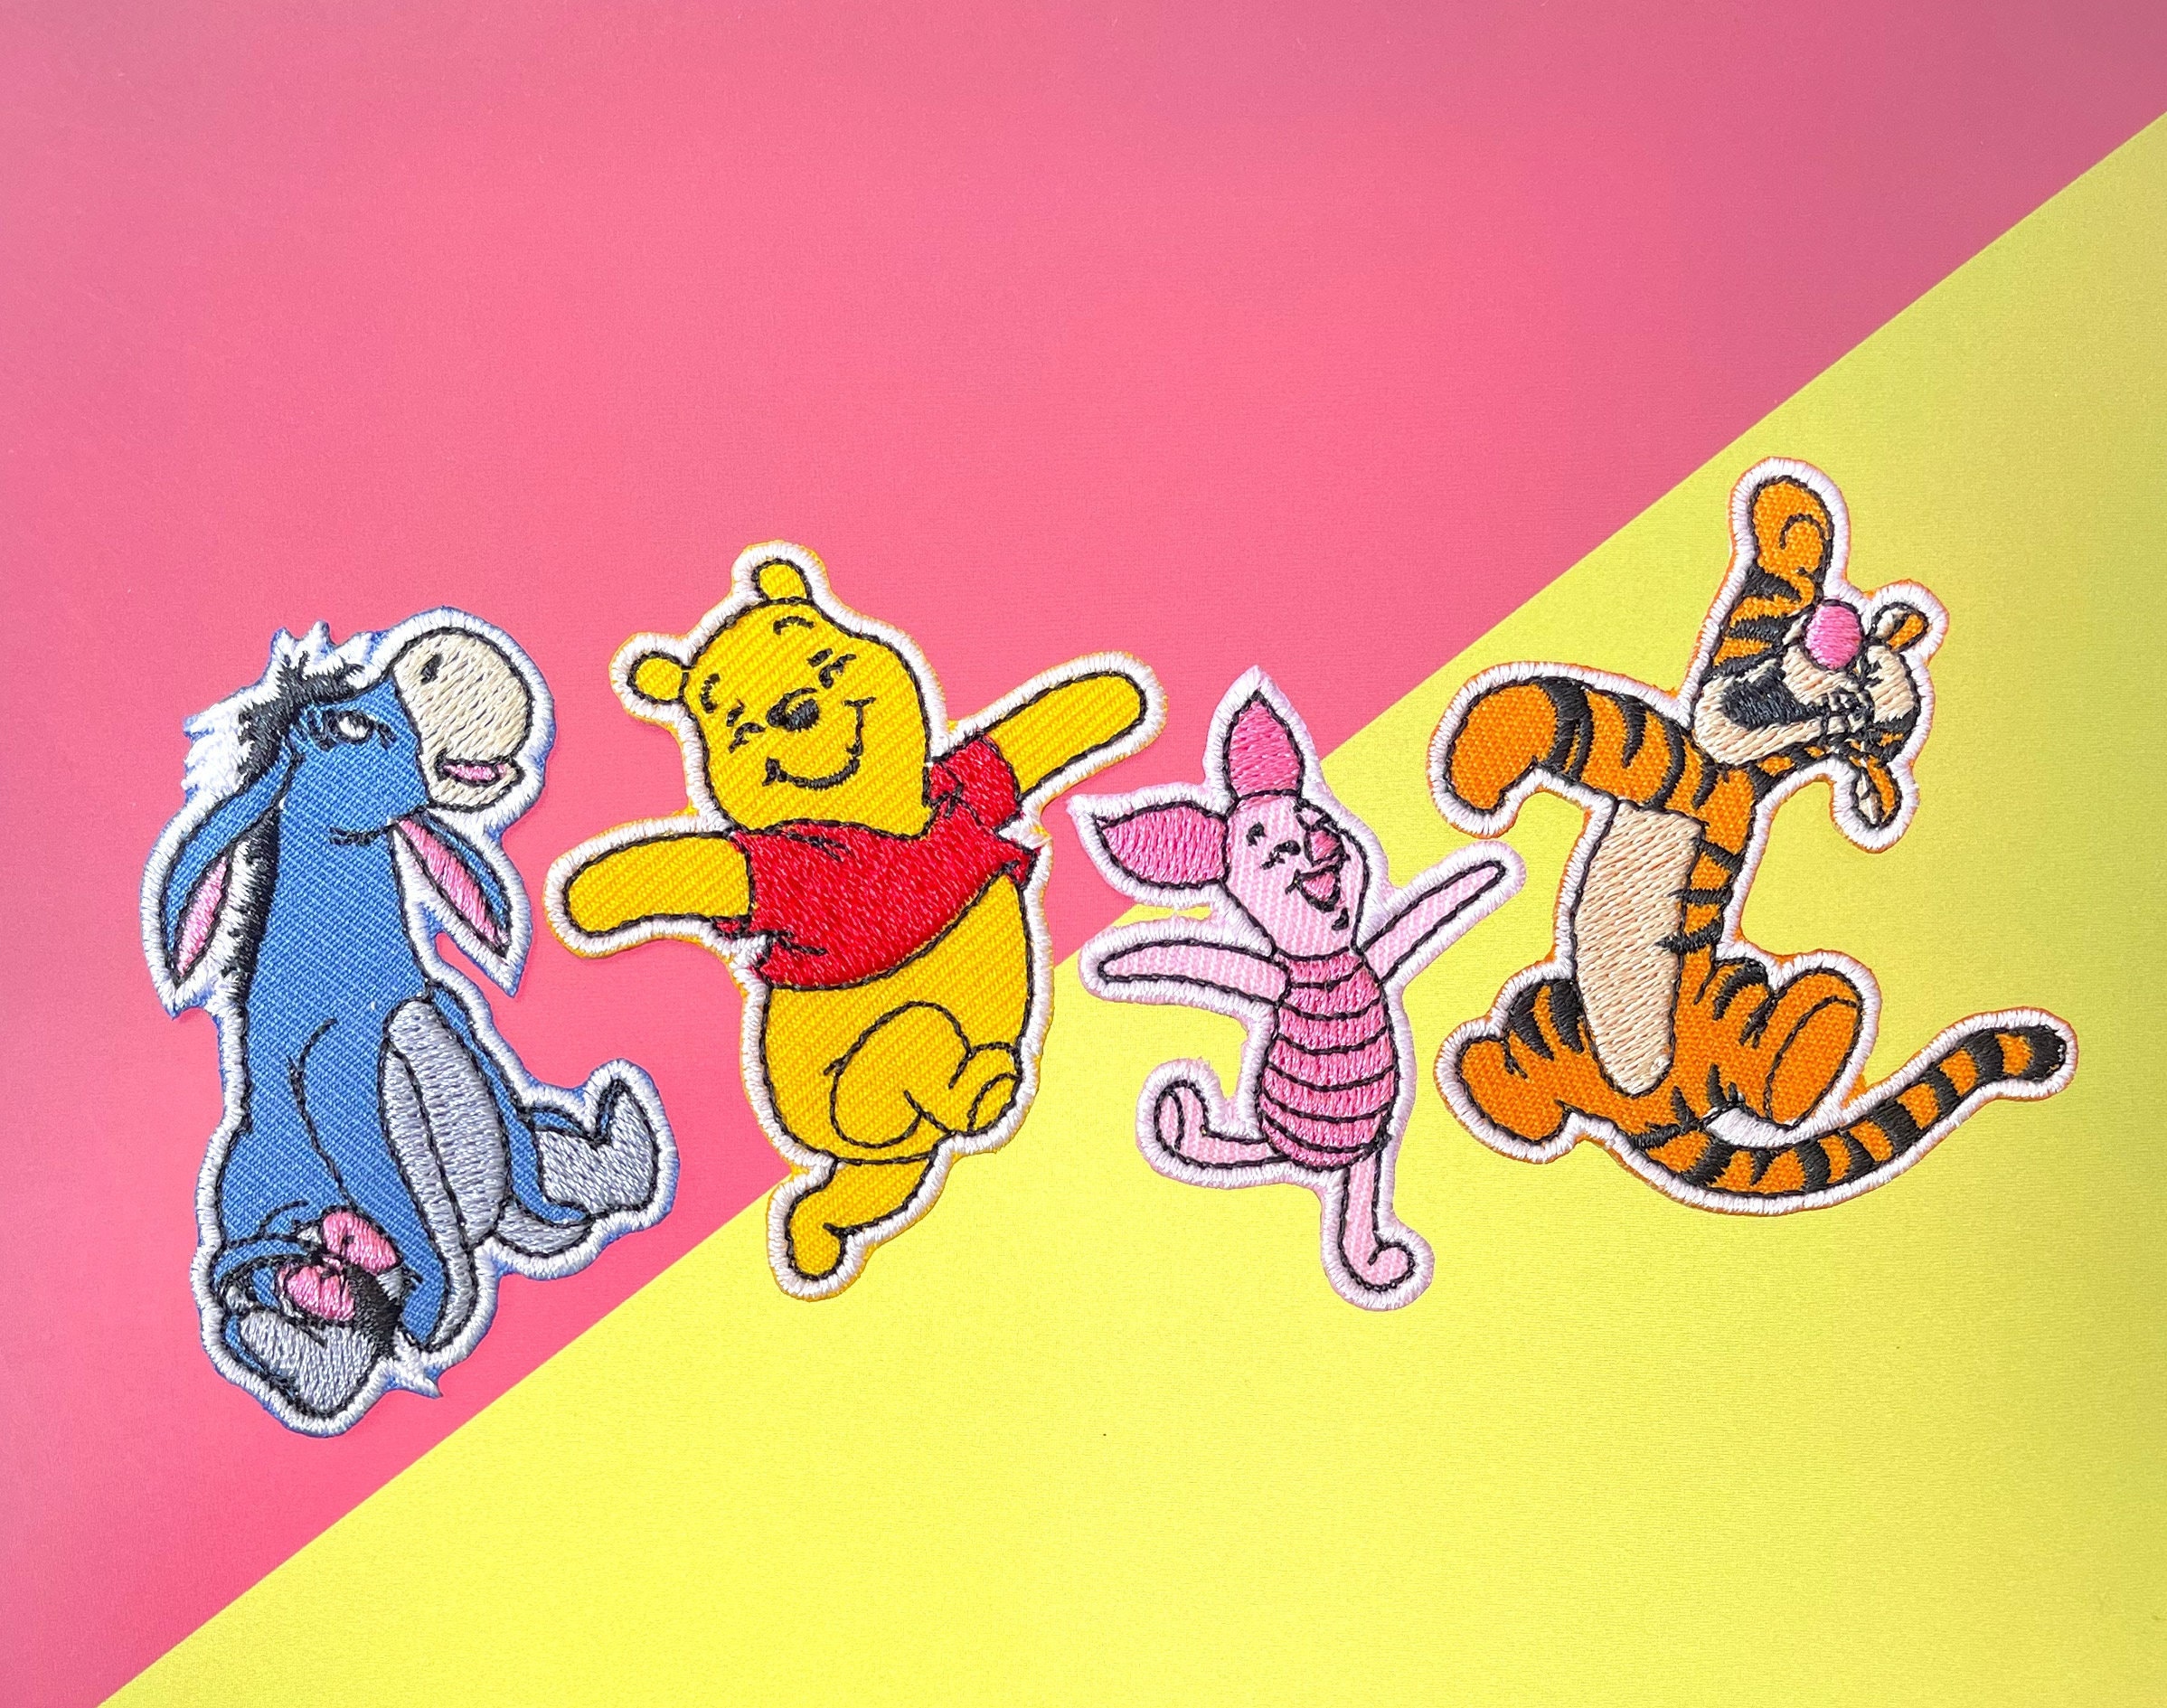 Winnie the pooh Friends Iron On / Sew On Patch Badge